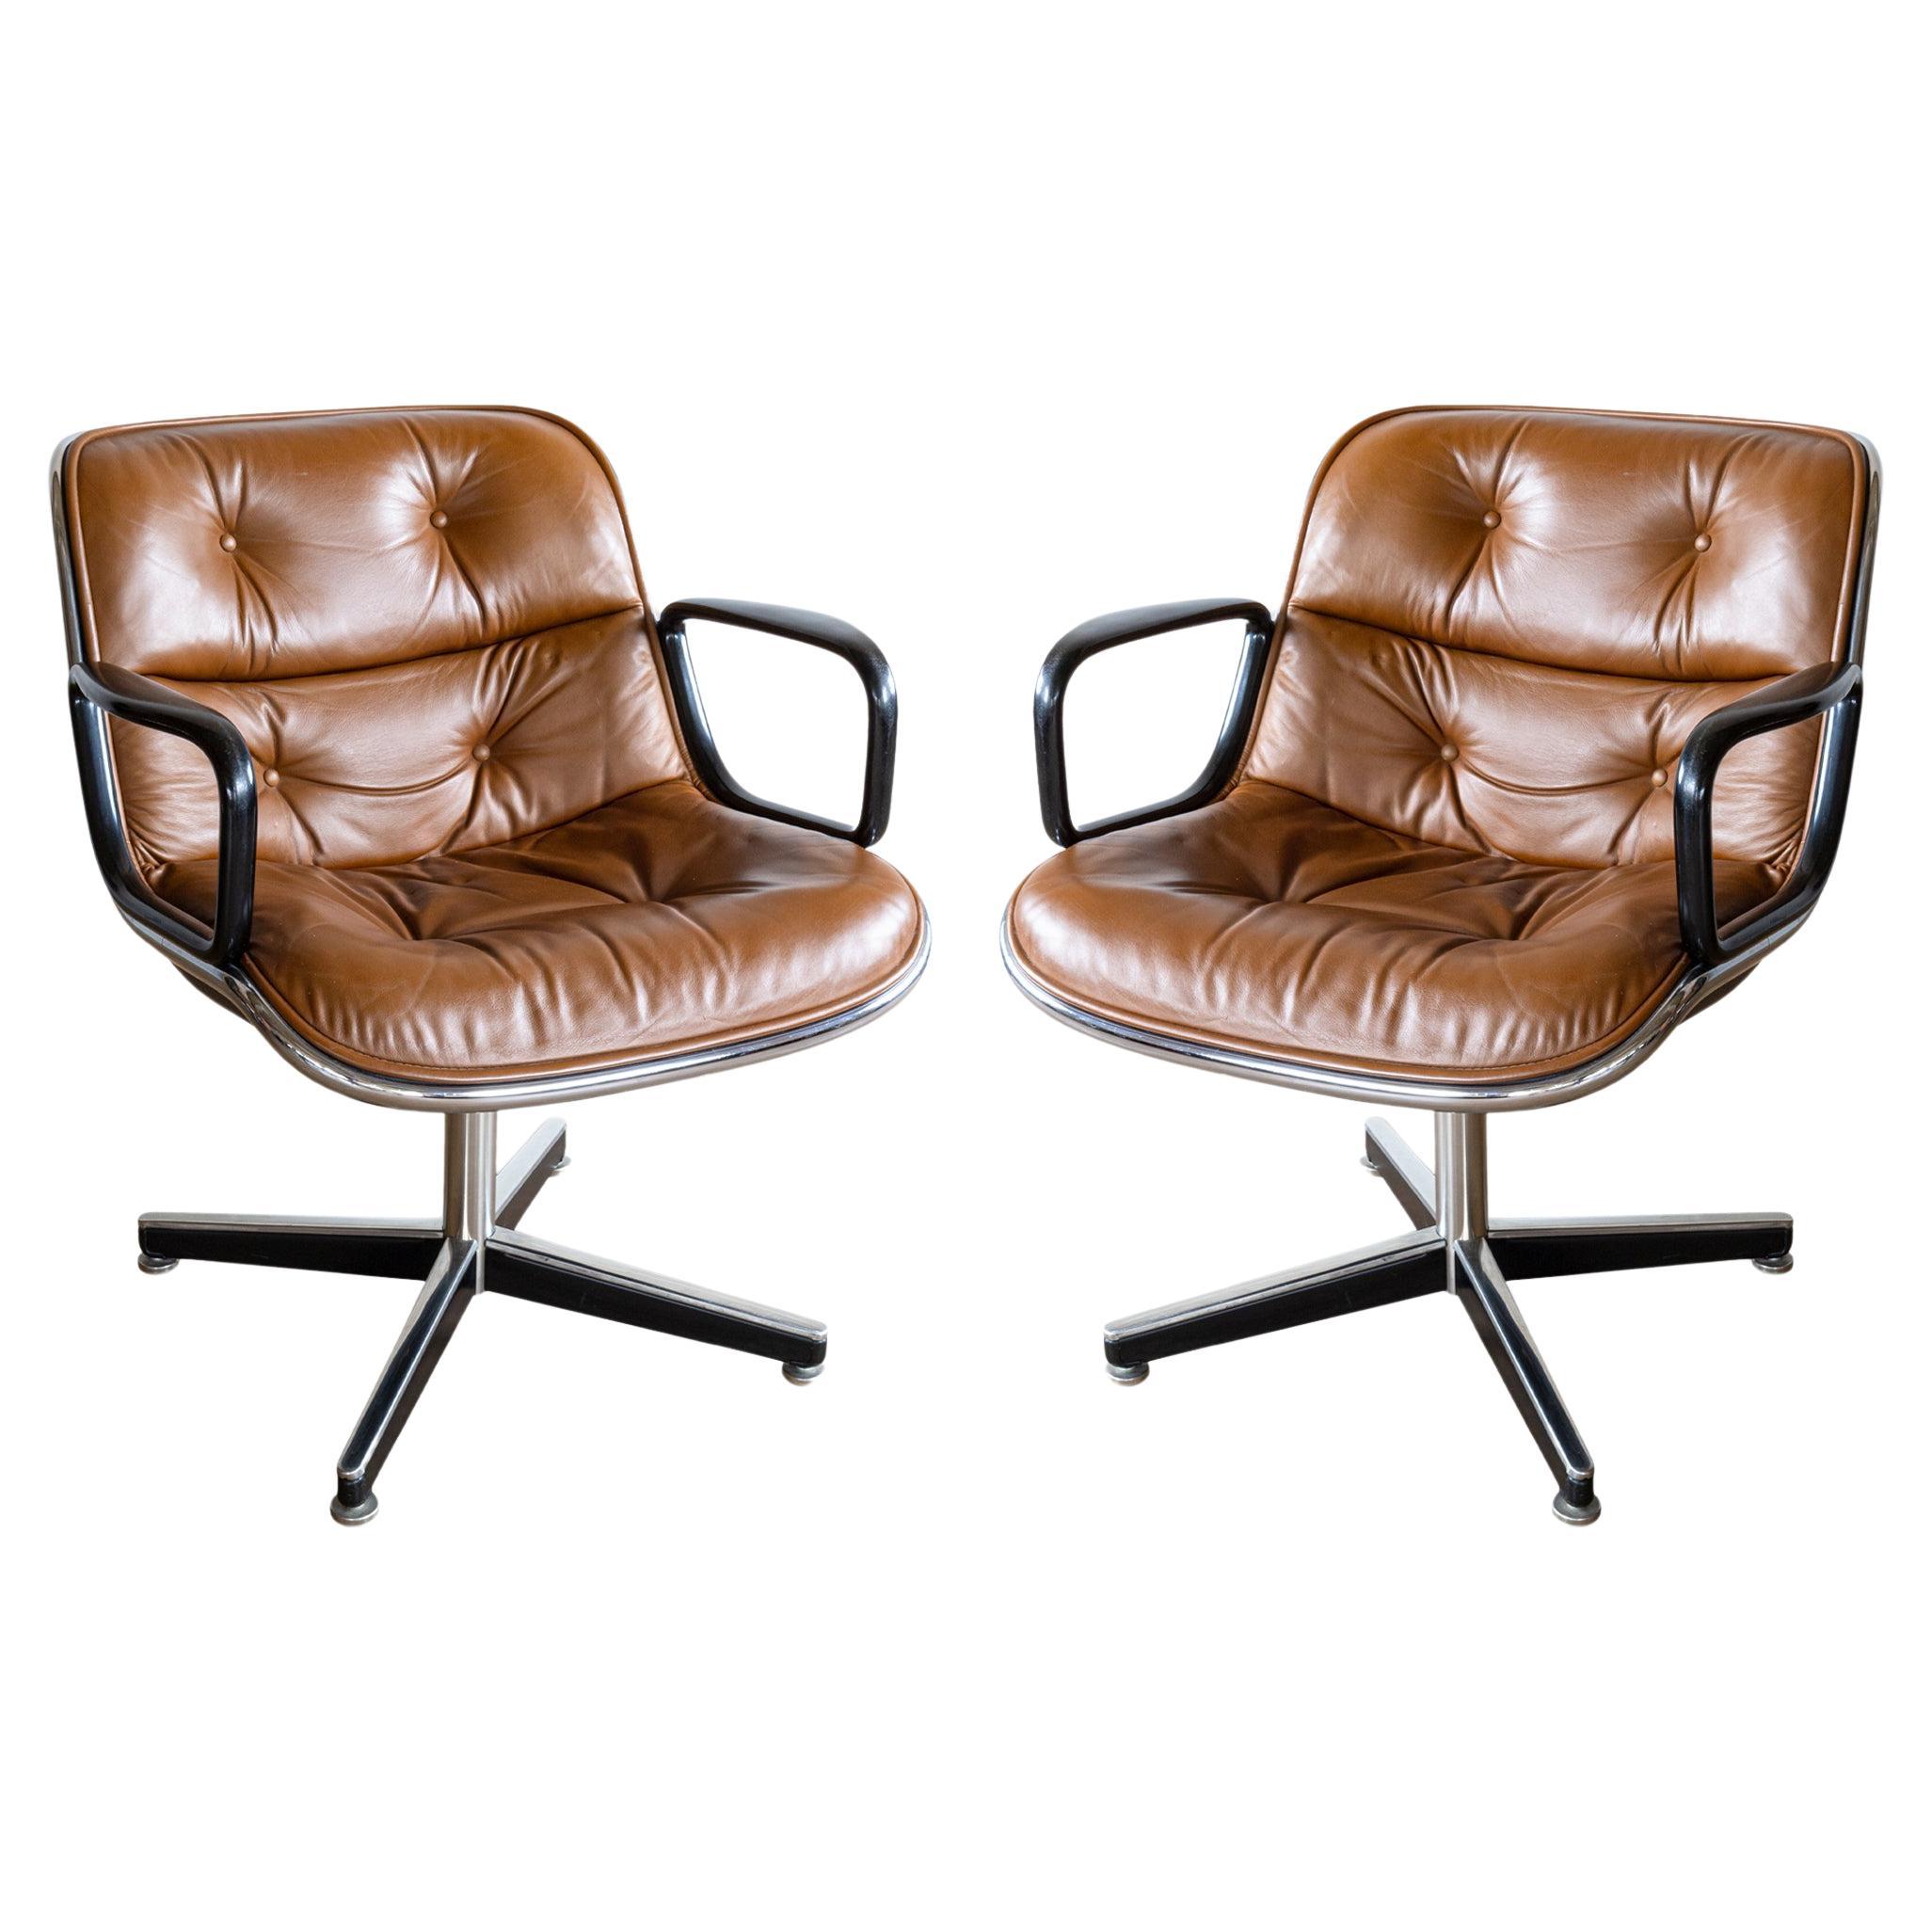 Pair of Charles Pollock for Knoll Mid Century Brown Leather Executive Chairs